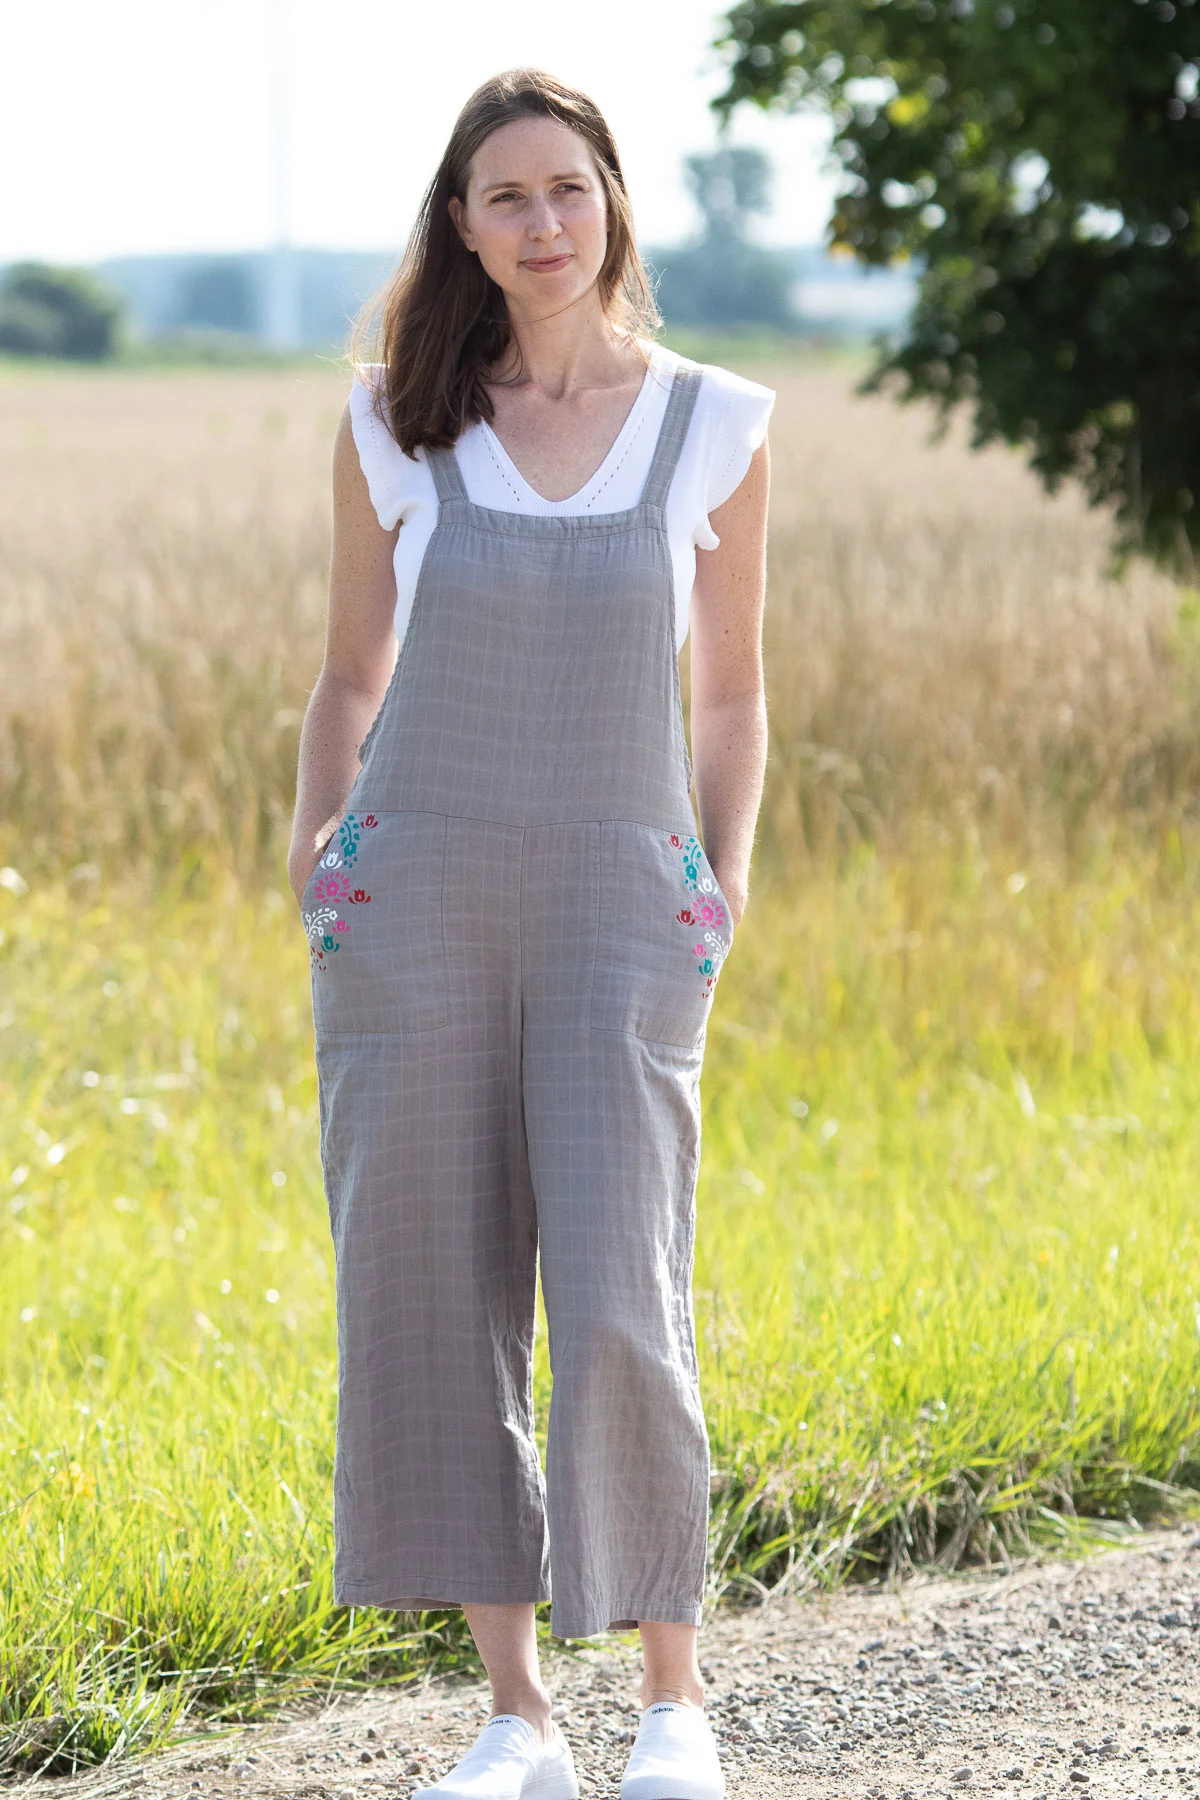 Personalizing Cotton Jumpsuits for Women with Cricut – Sustain My Craft  Habit